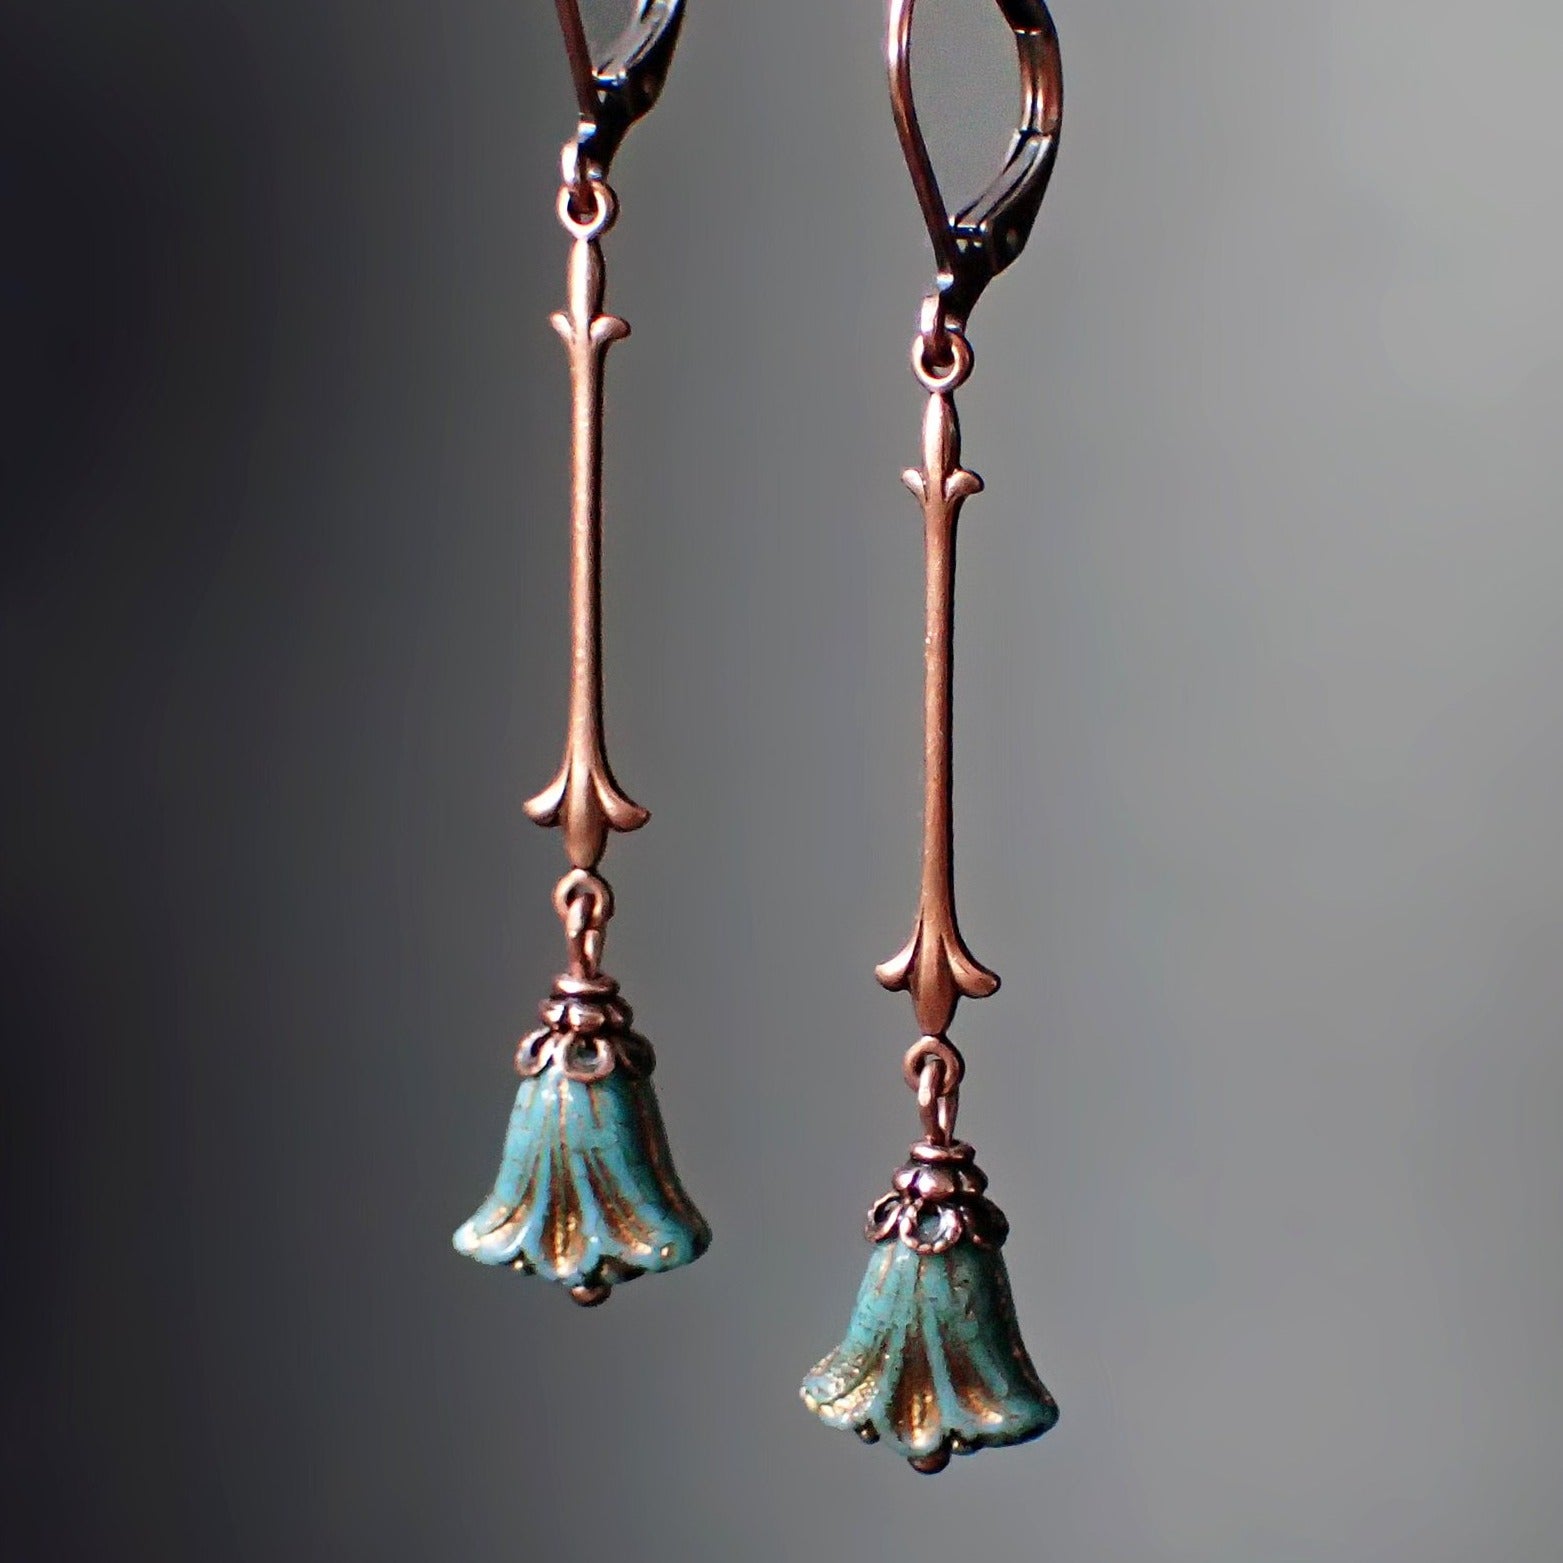 Turquoise Colored Lily Earrings with Antiqued Copper and Designer Czech Glass Beads